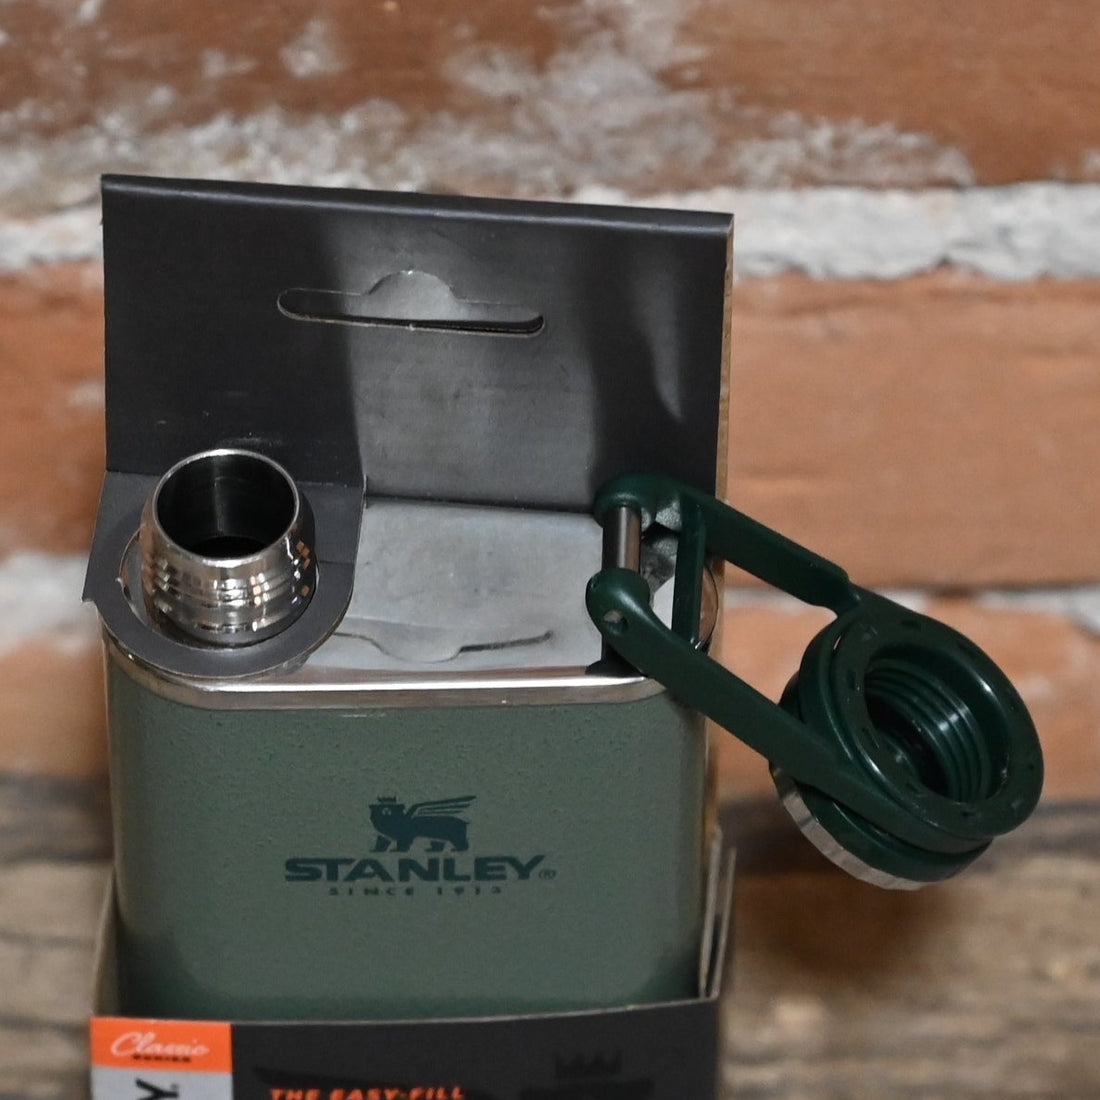 Stanley Classic Easy Fill Wide Mouth Flask in Hammertone Green view of mouth piece